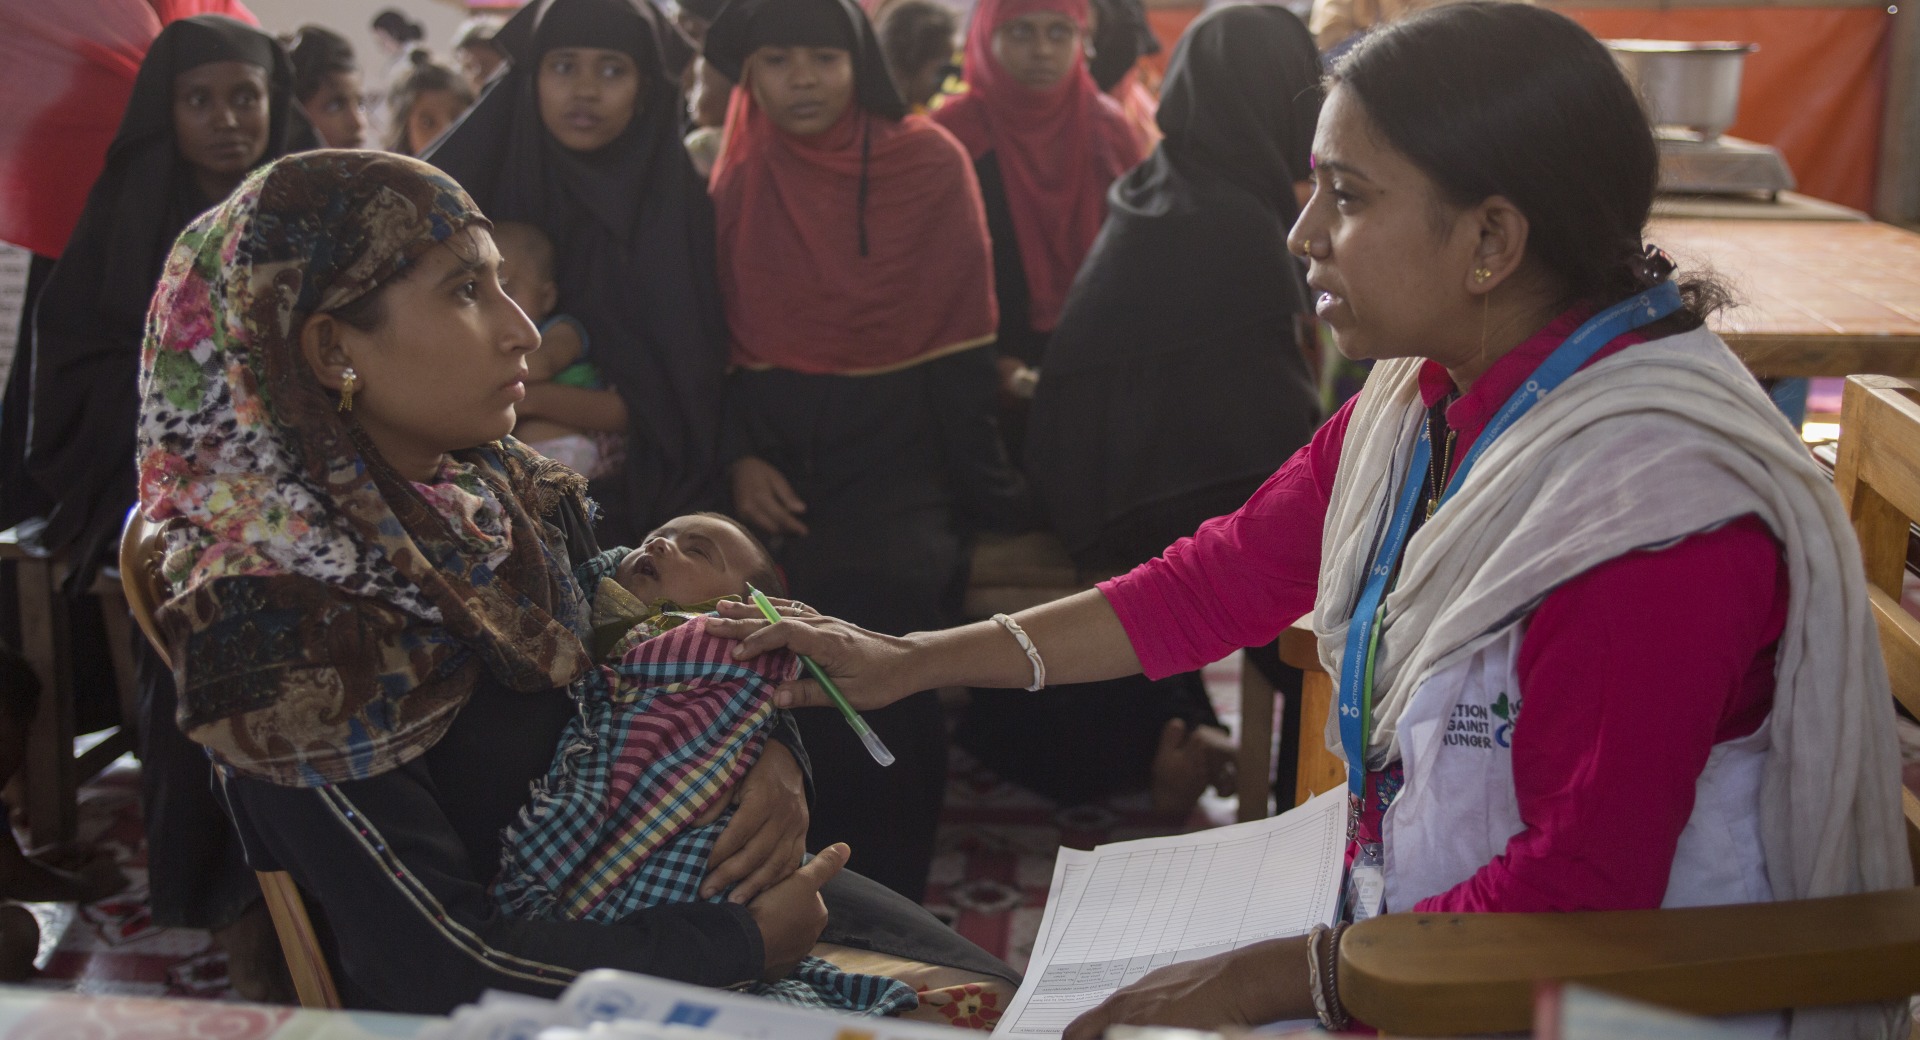 Health education officer, Shaki Rani Bose, talks to a young mother, Hosne Ara, with her baby, surrounded by Rohinga women as they wait patiently to be seen at an Action Against Hunger clinic for pregnant and breastfeeding mothers.